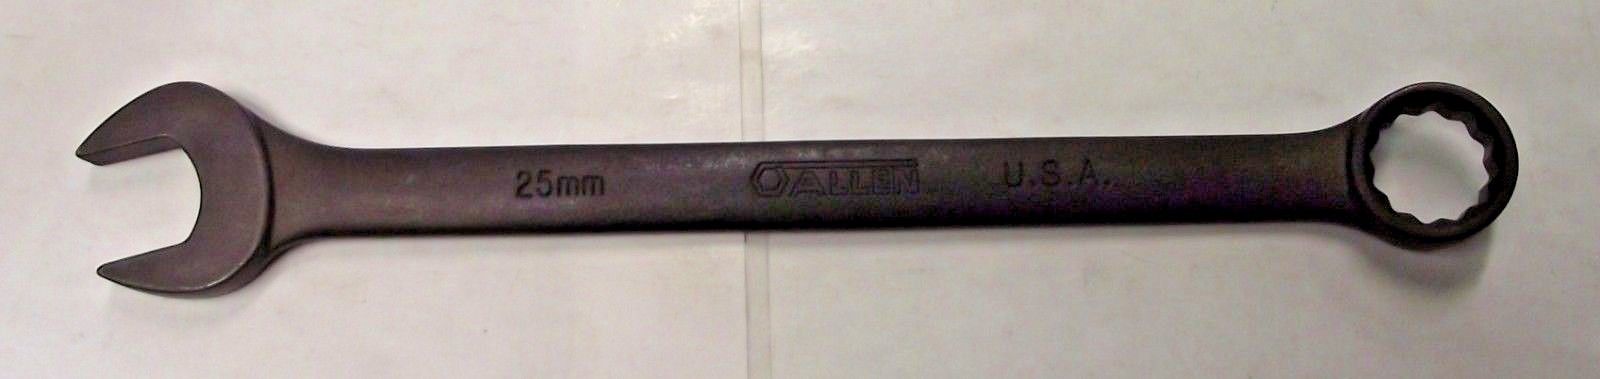 Allen 20325B 25mm 12 Point Combination Wrench Black Phosphate USA